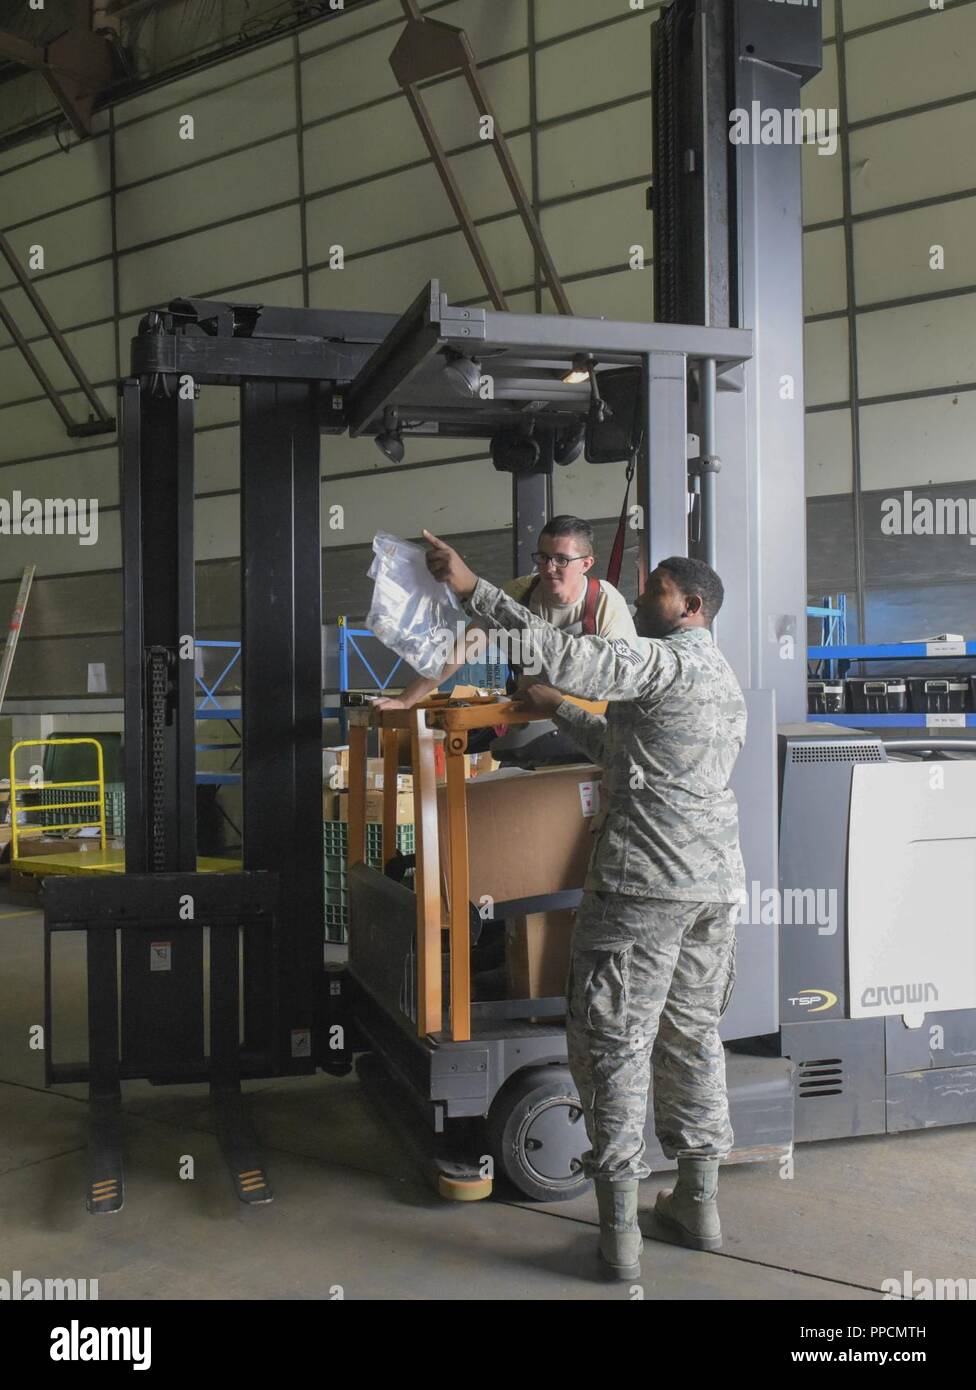 U.S. Air Force Airman 1st Class Hayden Theel, 100th Logistics Readiness Squadron aircraft parts store journeyman, and Staff Sgt. Elijah Rasheed, 100th LRS APS supervisor, locate an aircraft part to be placed in the proper location in a warehouse at RAF Mildenhall, England, Sept. 4, 2018. With all of the energy and time ‘DJ Messiah’, also known as Staff Sgt. Rasheed, puts into his part-time job as a disc jockey, he never lets it interfere with him being a full-time non-commissioned officer. Stock Photo